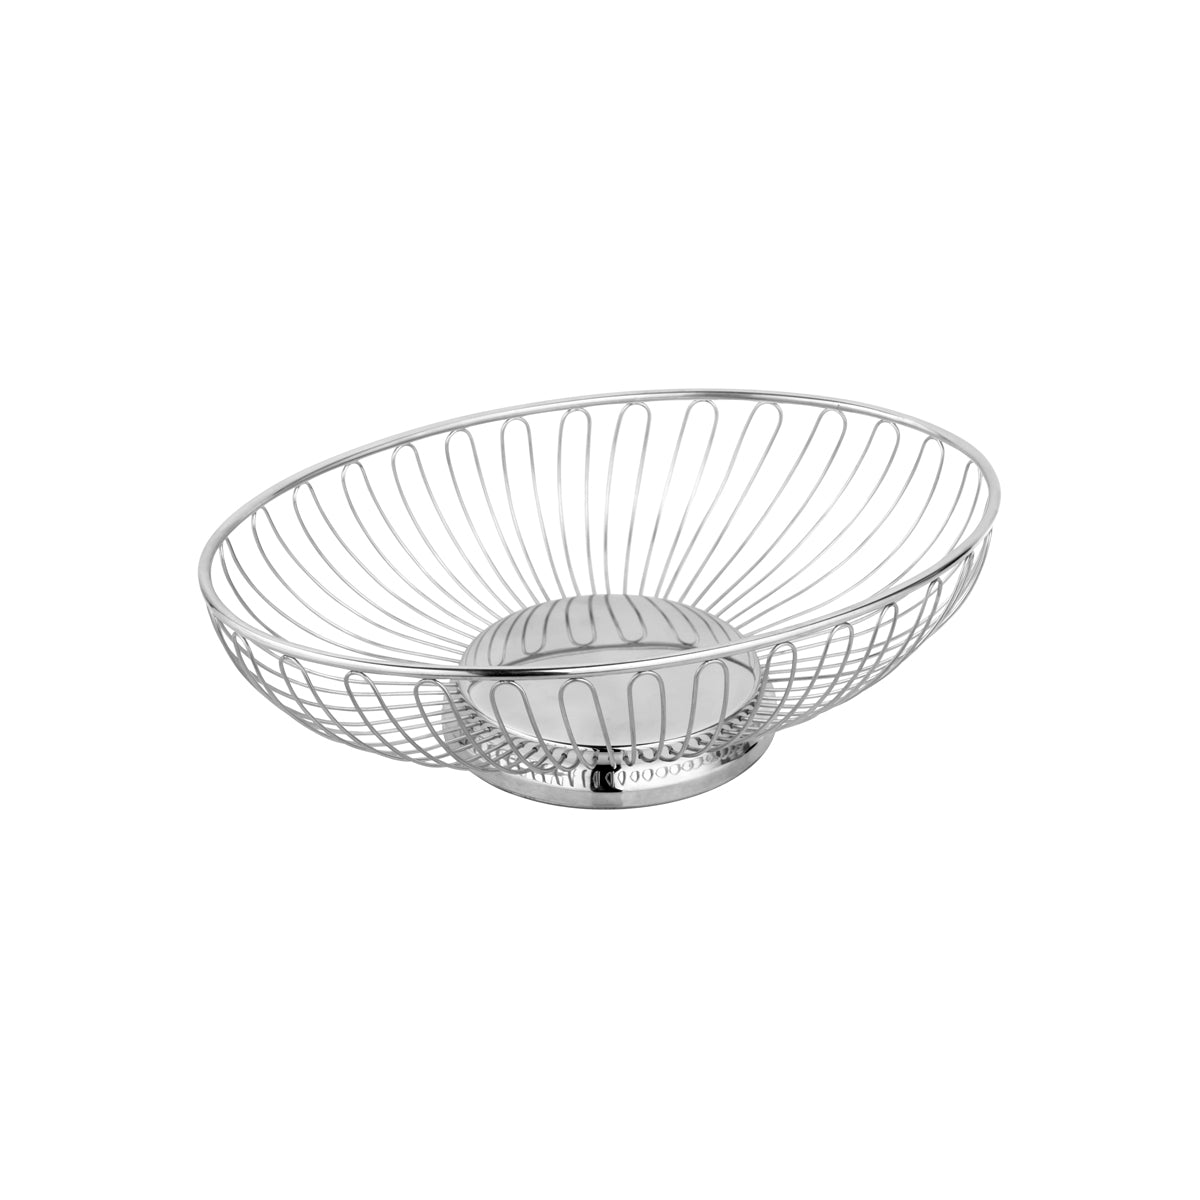 70359 Chef Inox Oval Wire Basket Solid Base Stainless Steel 275x225x88mm Tomkin Australia Hospitality Supplies